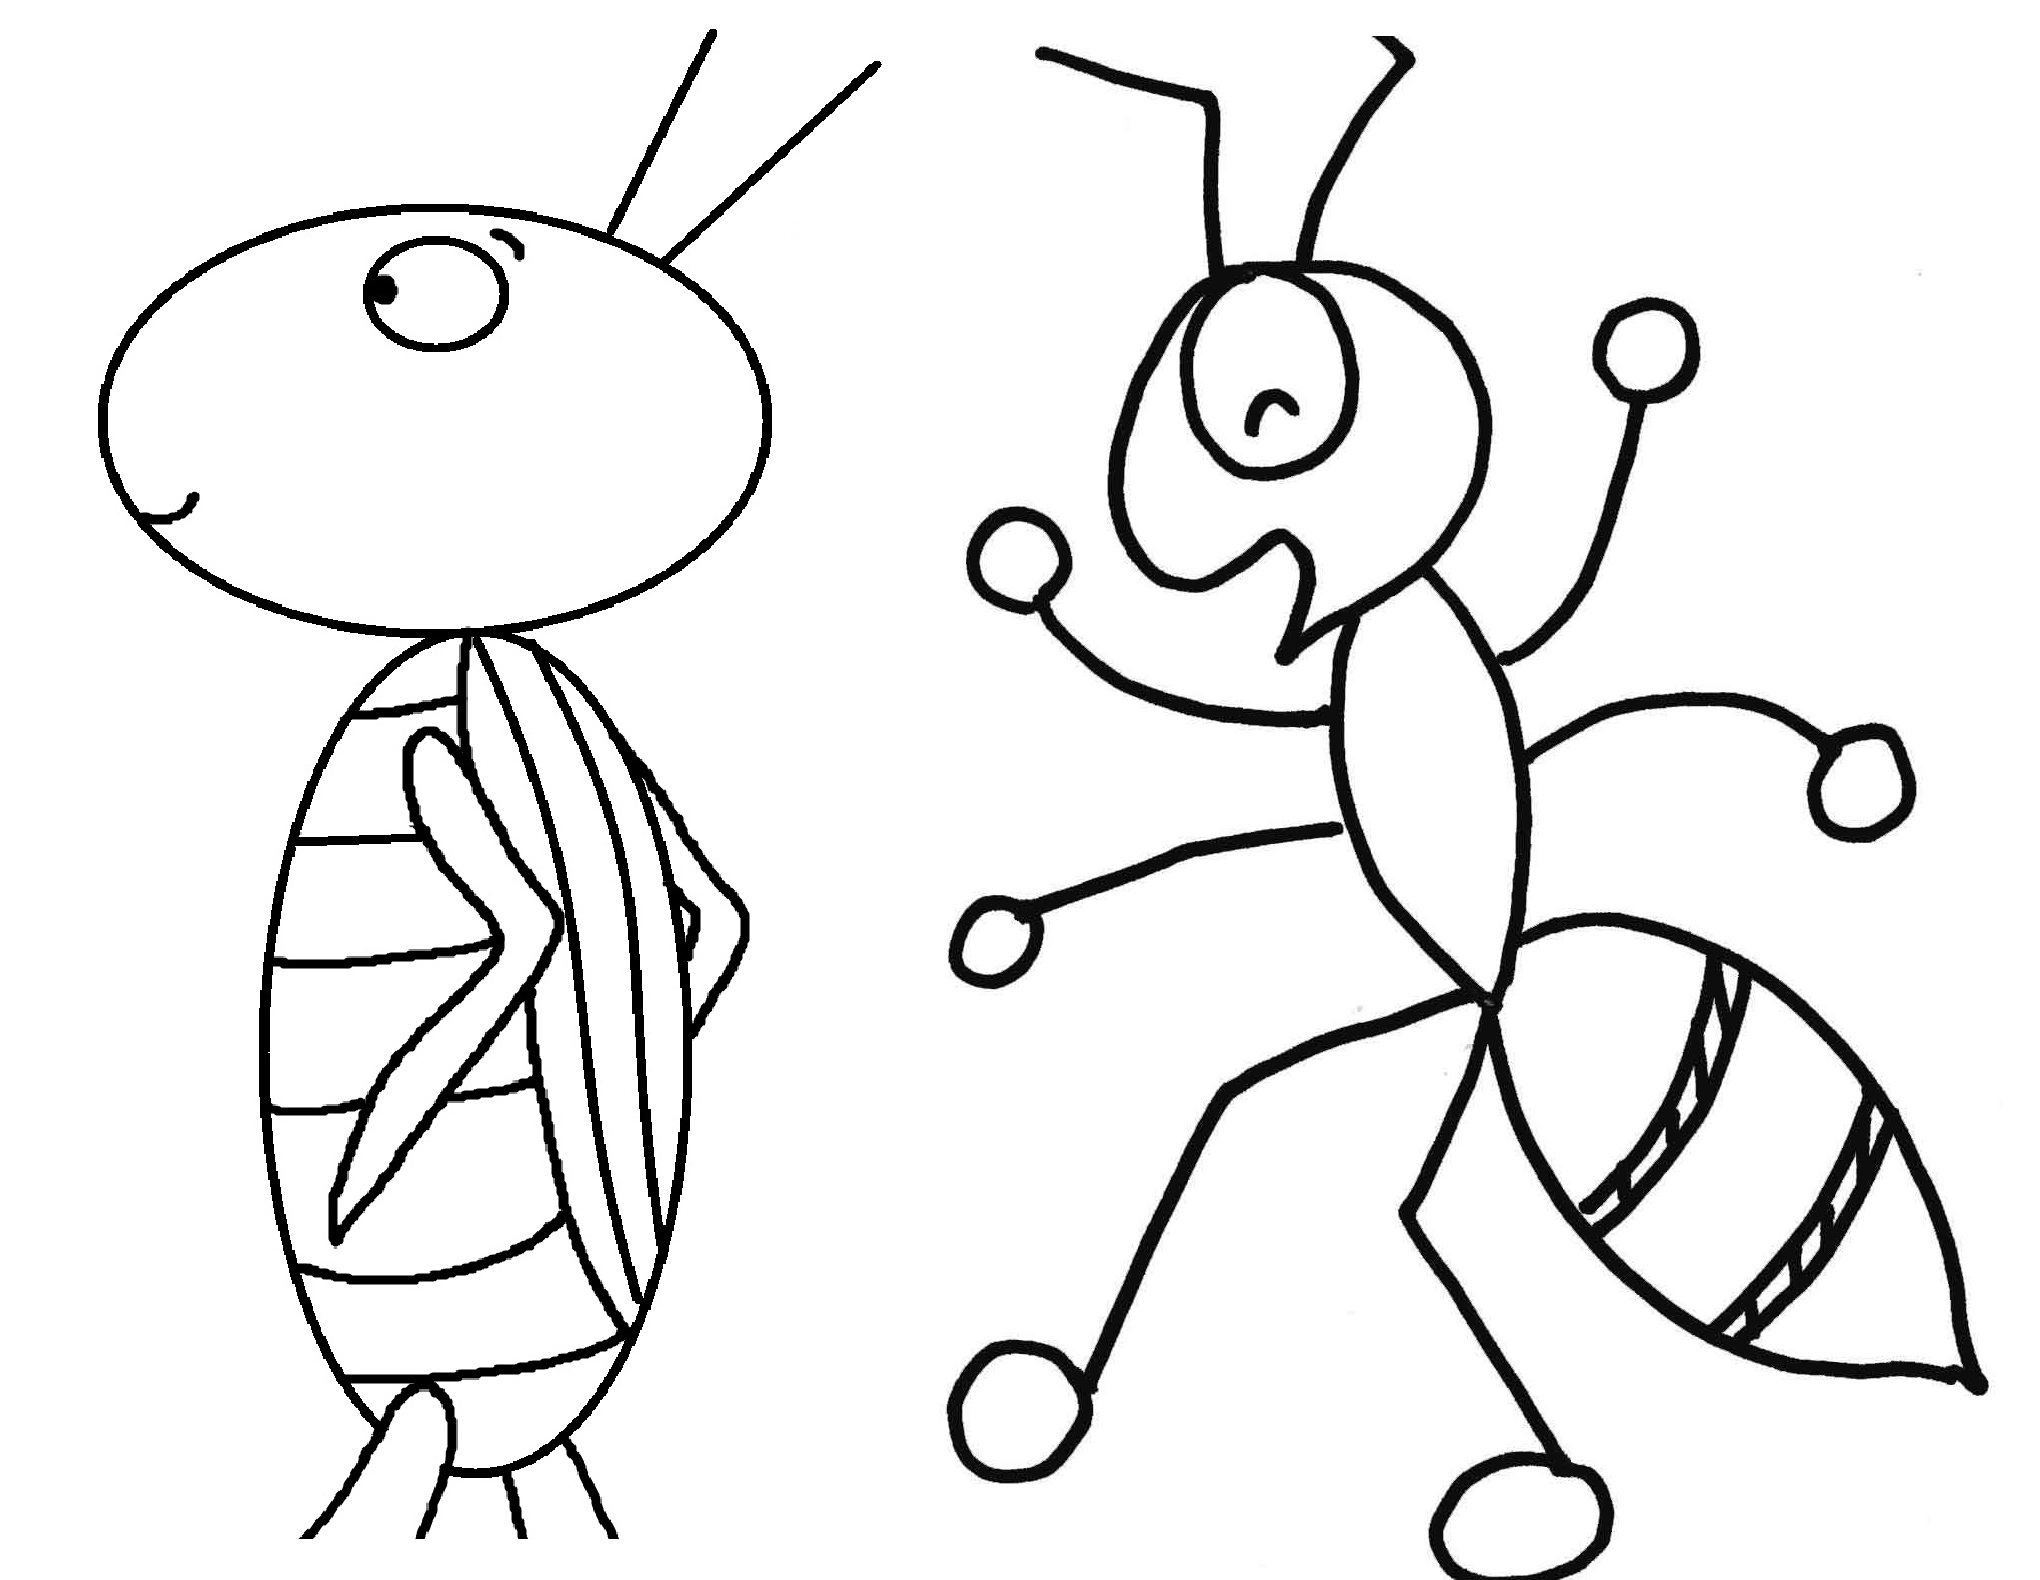 Ants coloring #4, Download drawings